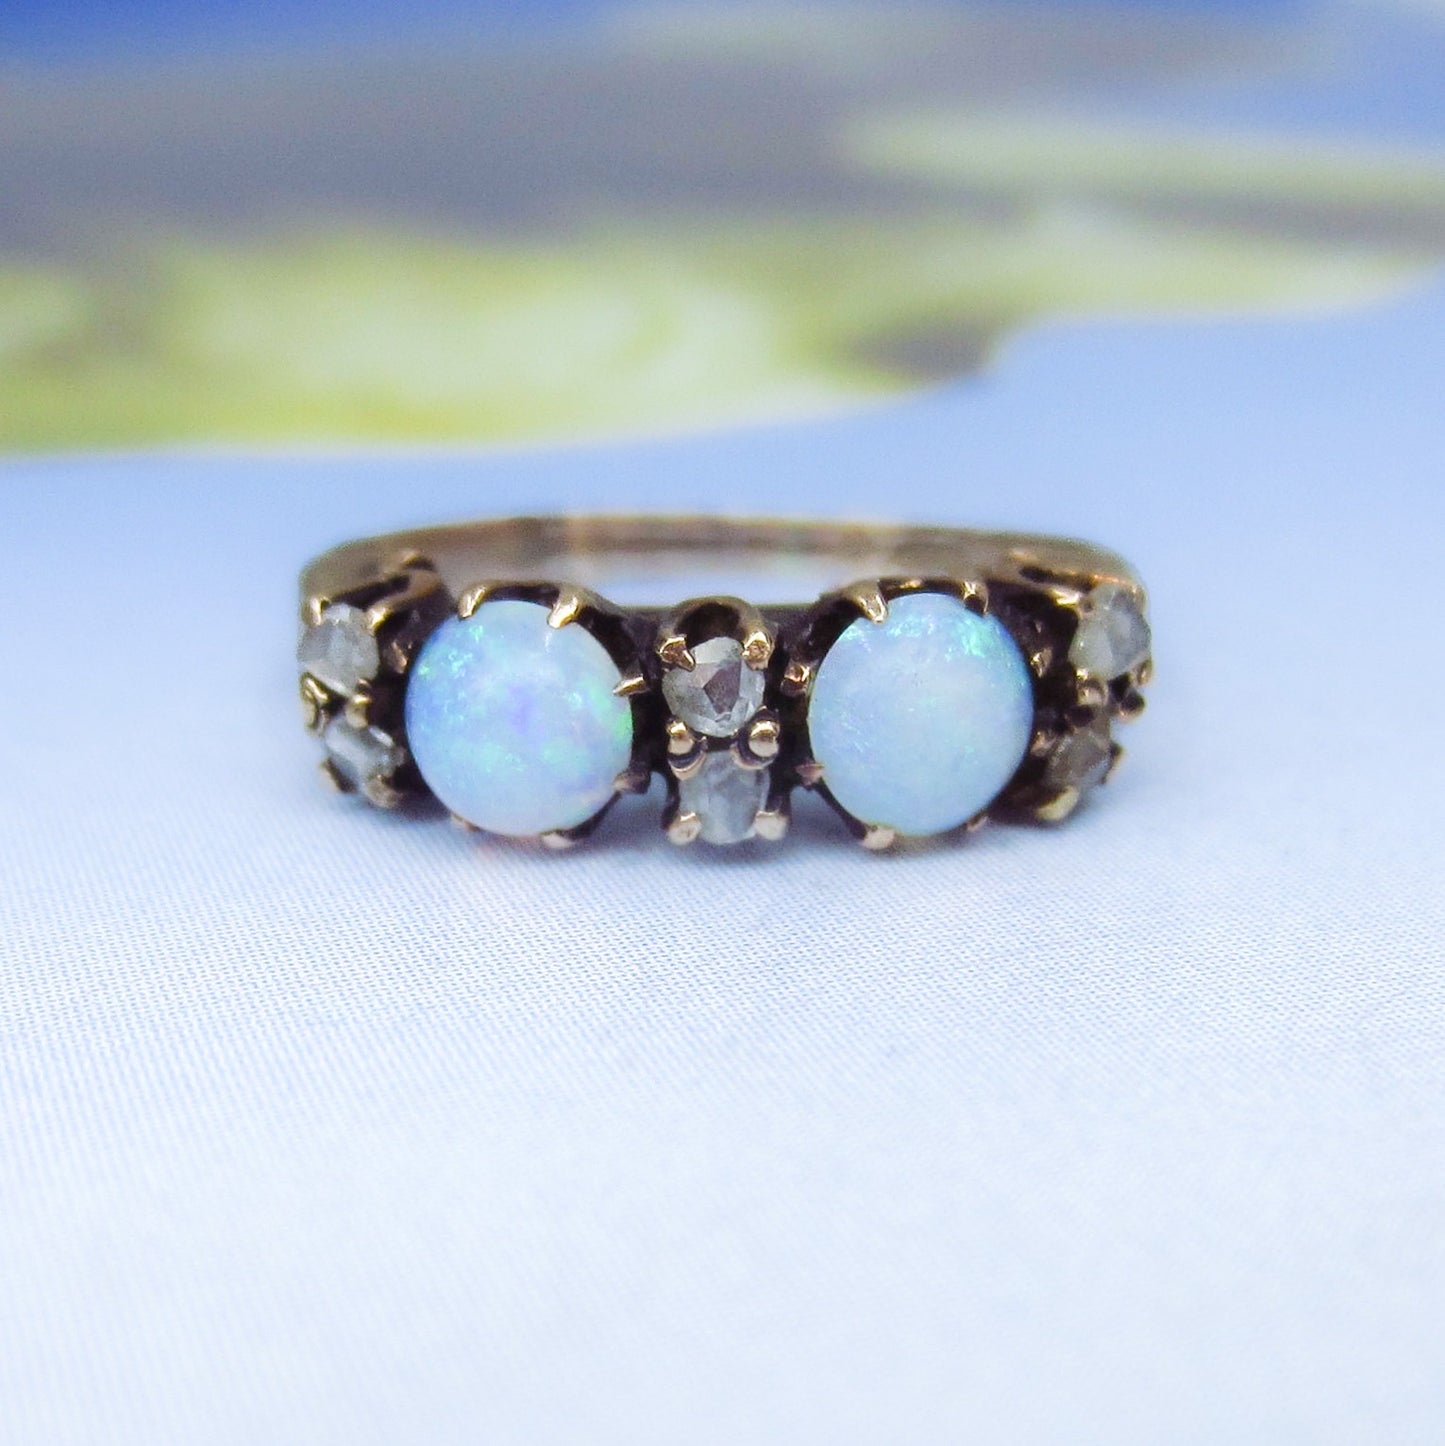 SOLD-Victorian Opal and Rose Cut Diamond Ring 14k c. 1890